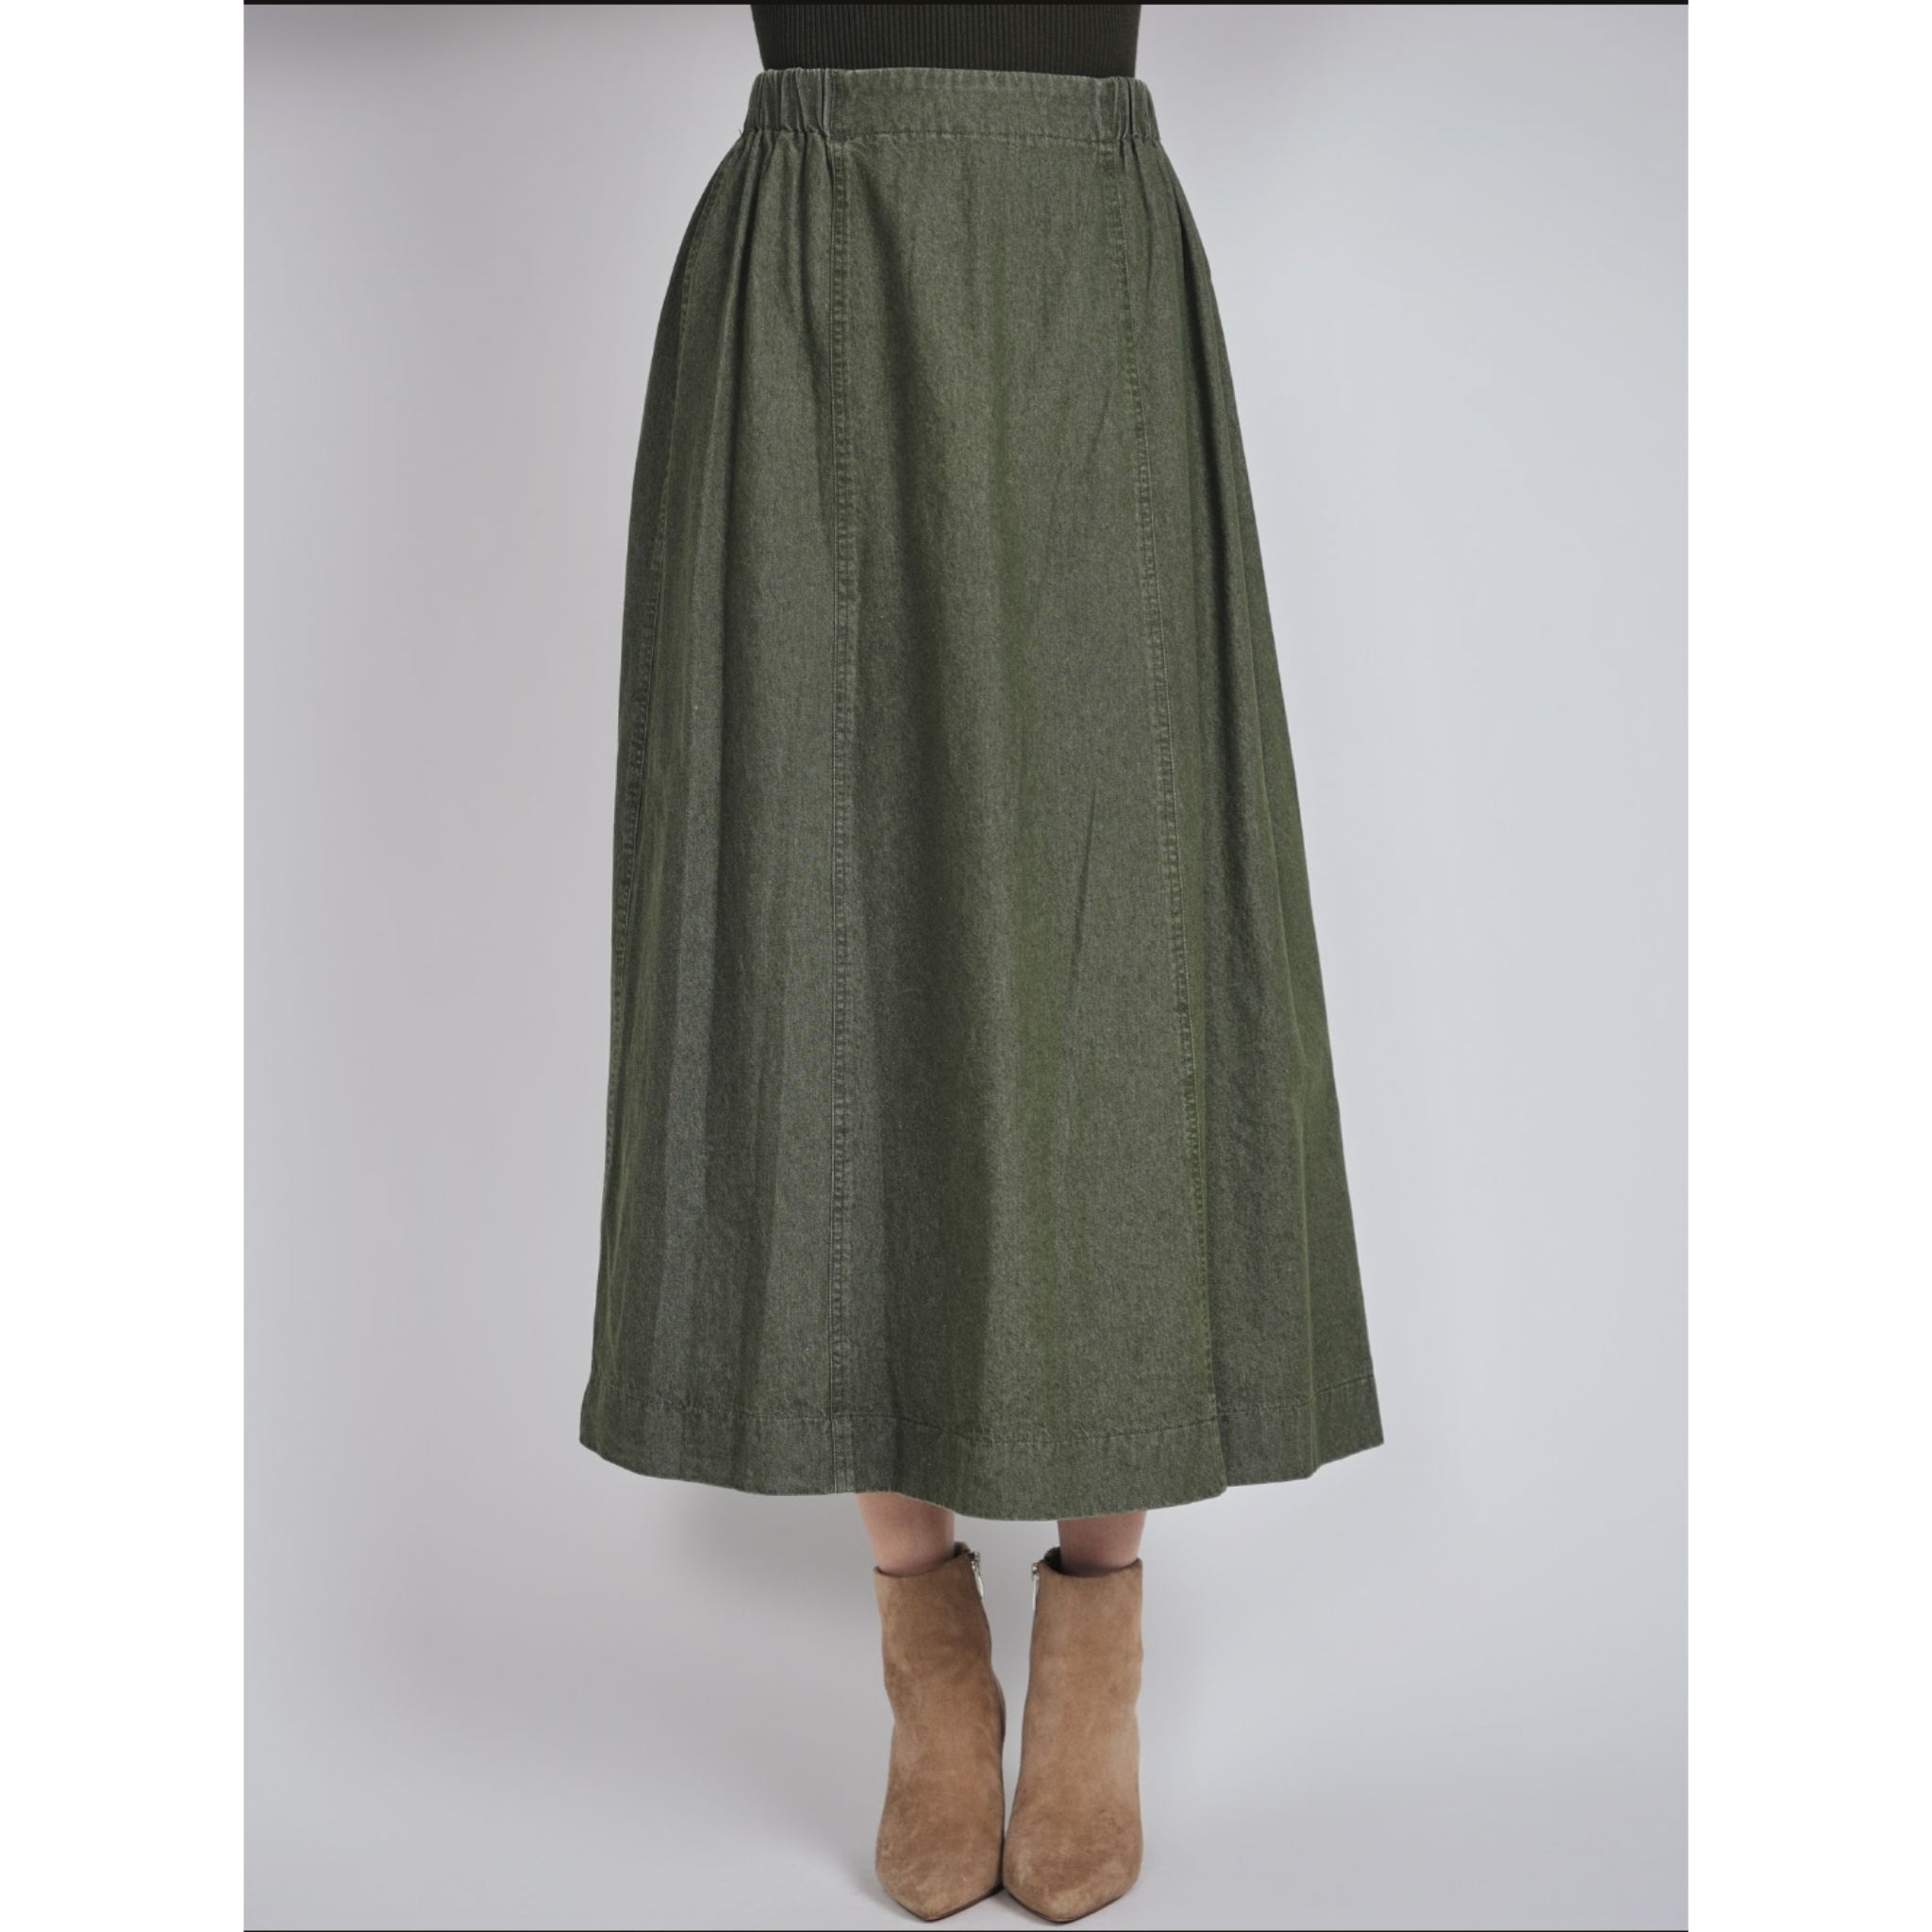 Denim Green Skirt by Yal – The Mimi Boutique